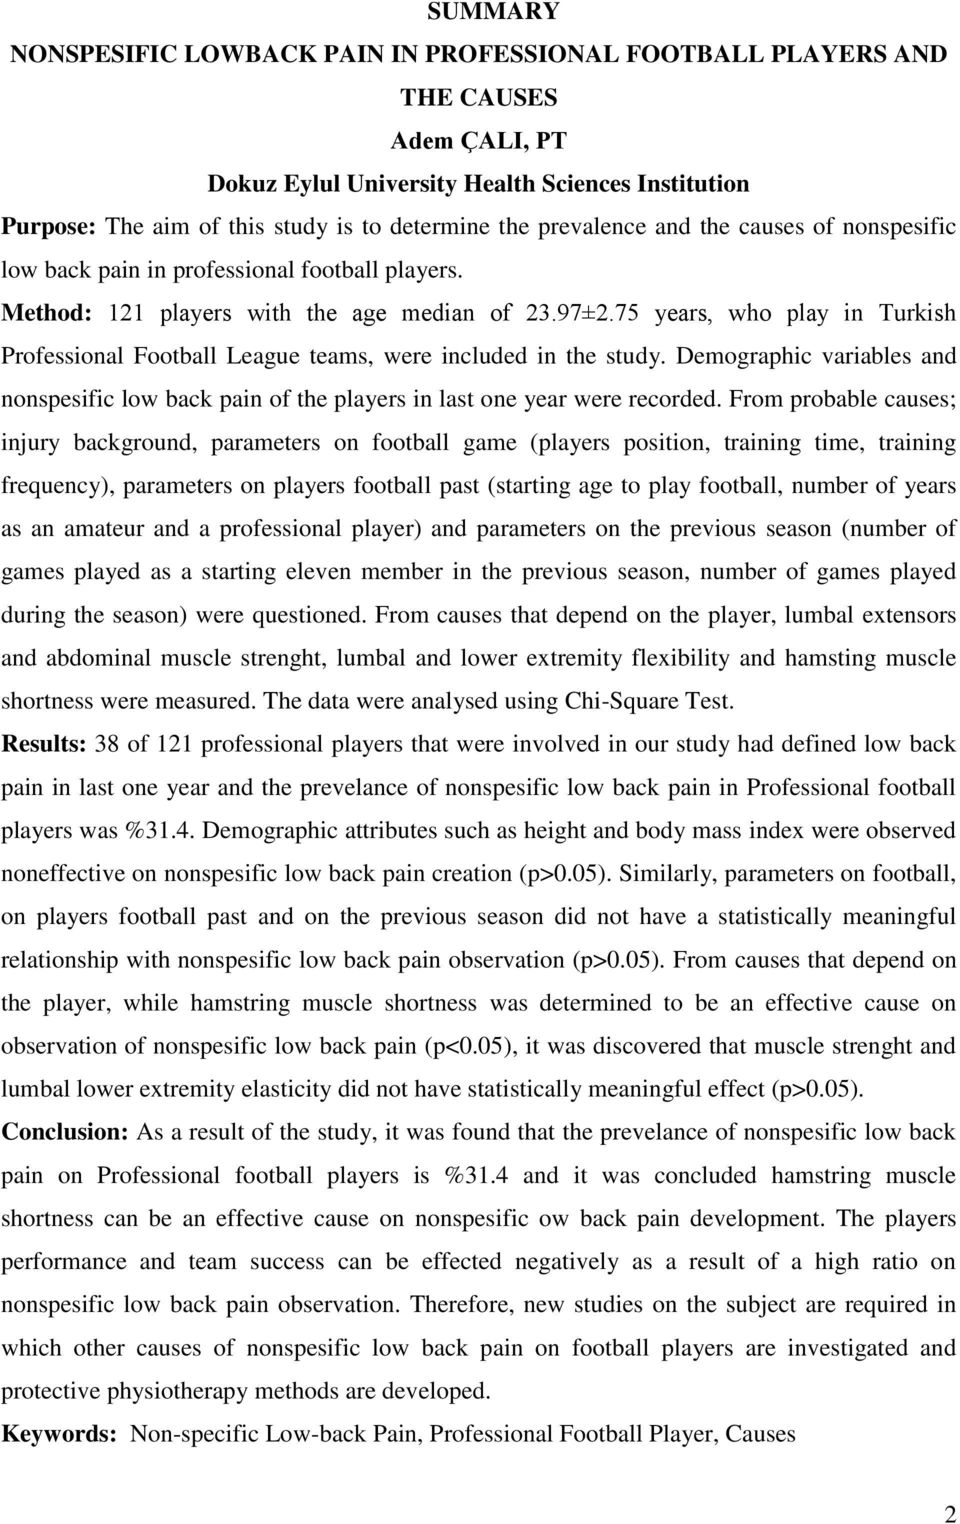 75 years, who play in Turkish Professional Football League teams, were included in the study. Demographic variables and nonspesific low back pain of the players in last one year were recorded.